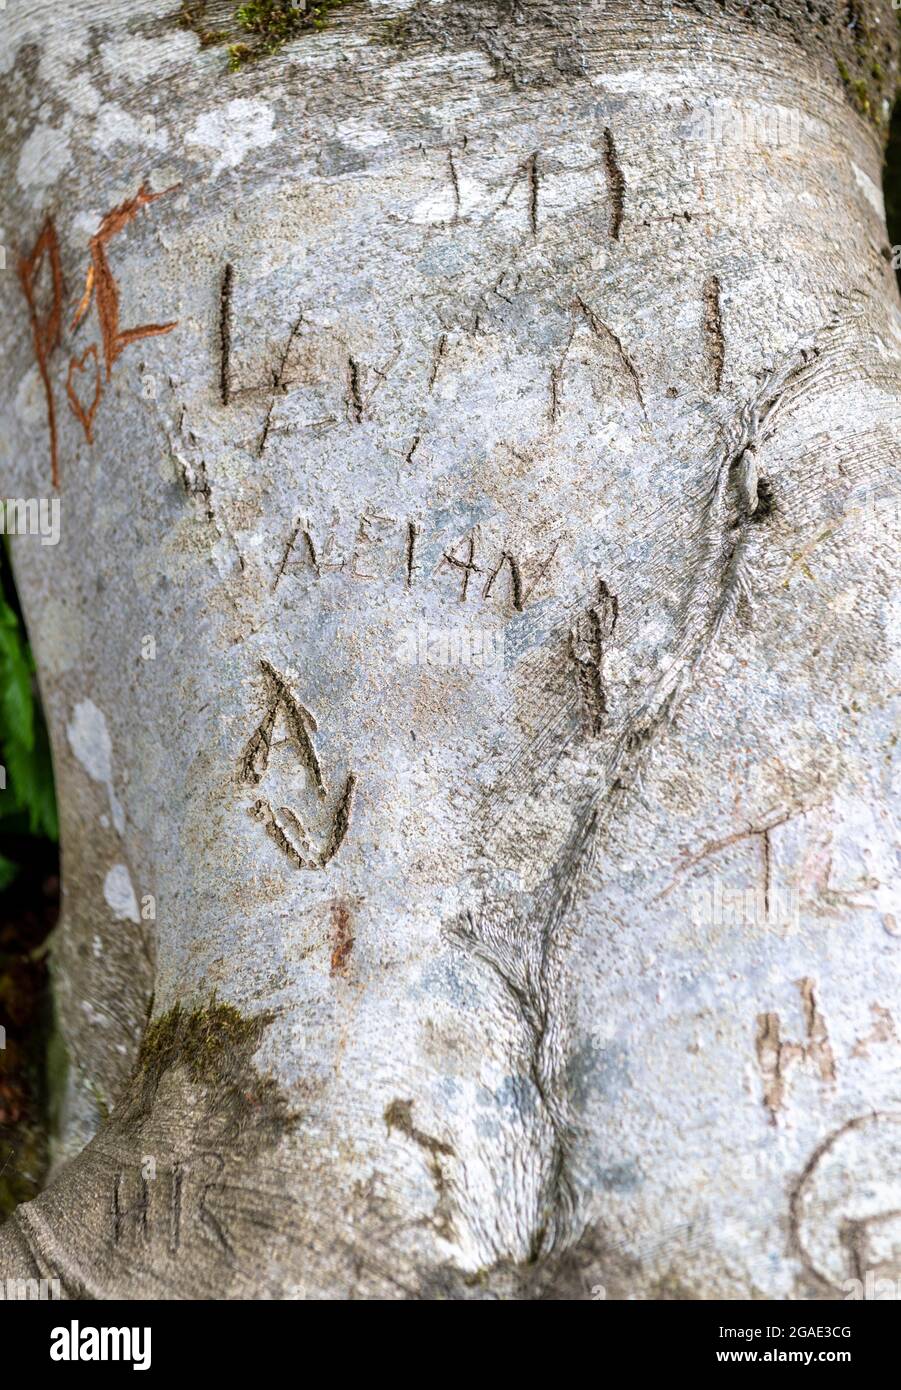 Initials of lovers carved onto the trunk of a tree, Durham, UK. Stock Photo